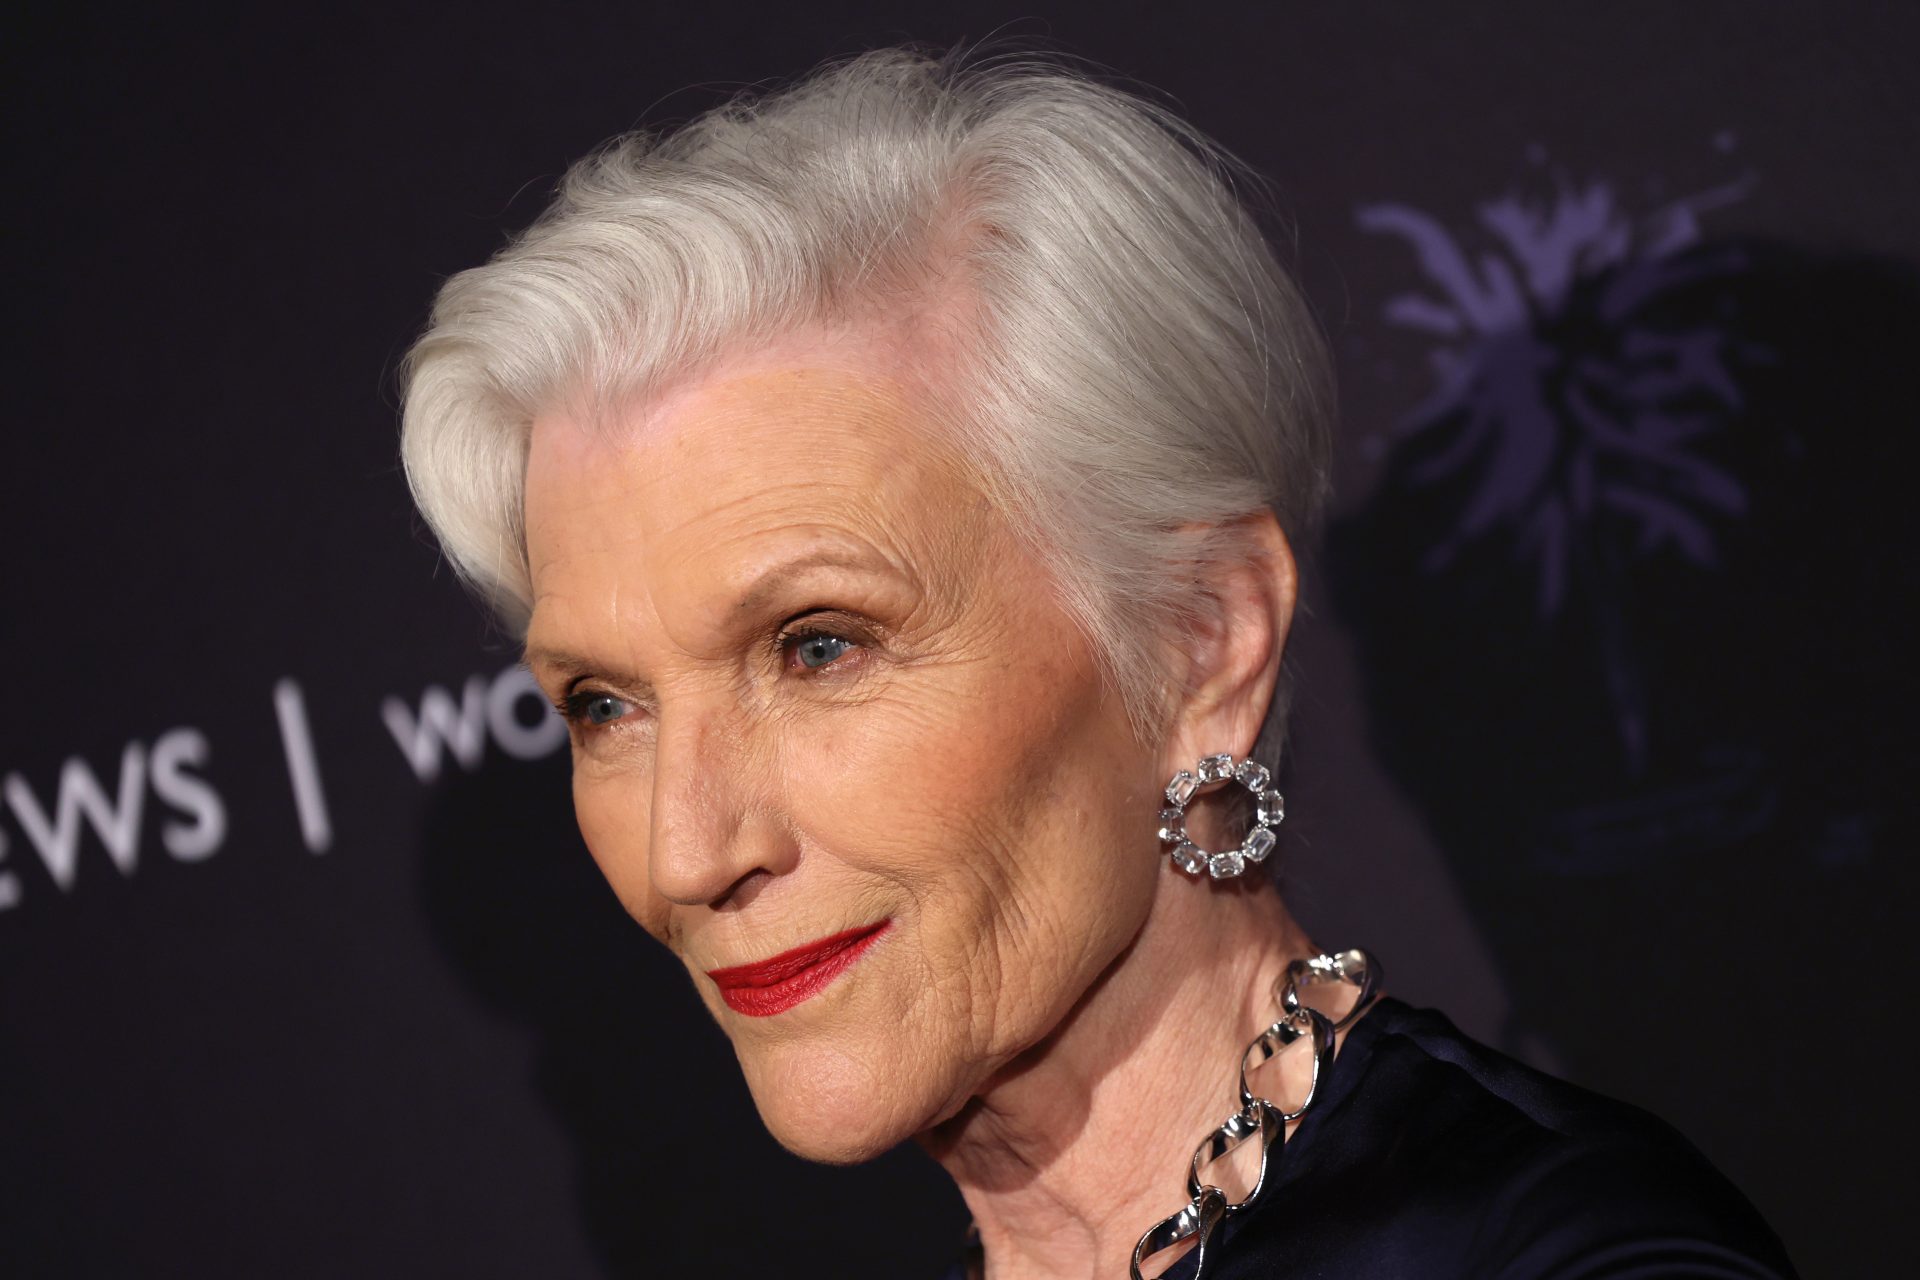 Maye Musk: the atypical mother and 'heroine' of Elon Musk